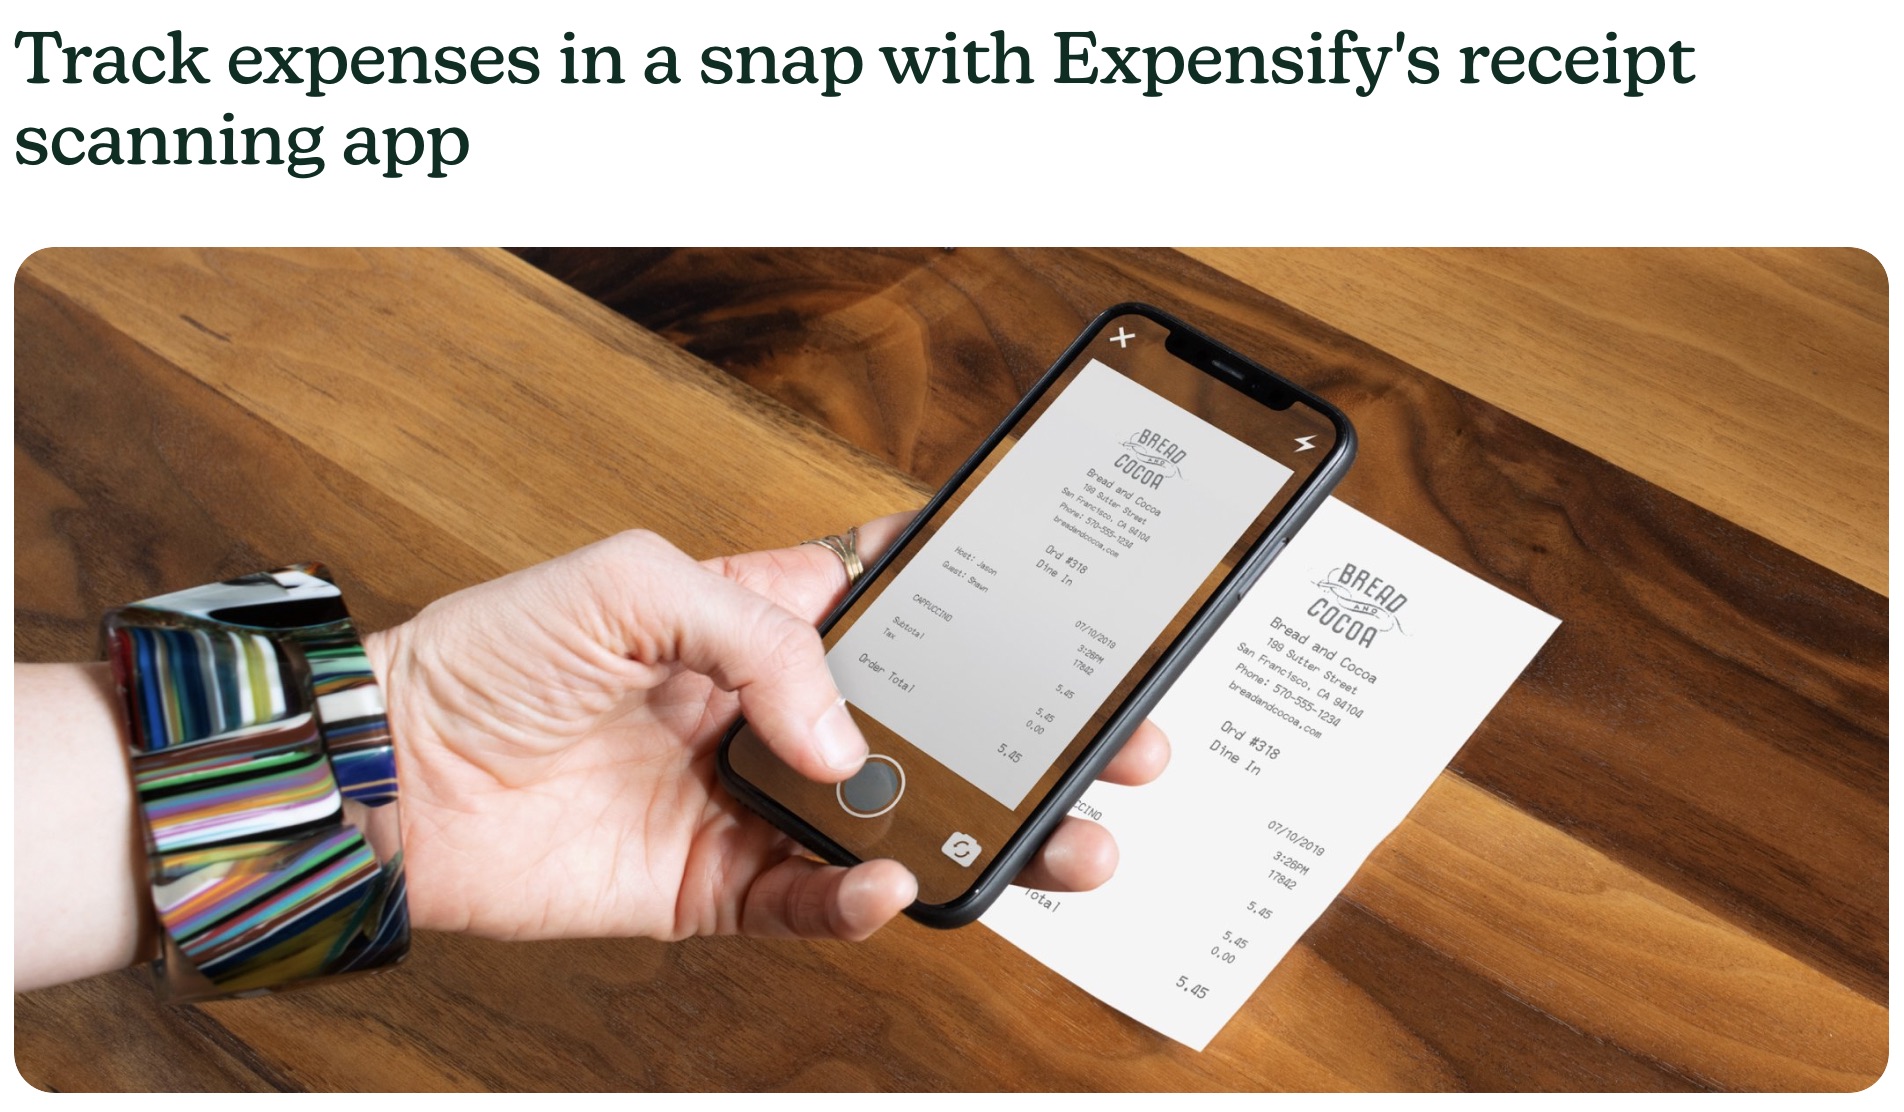 Expensify - The Best Receipt Scanner Apps for Small Business Owners - Relay